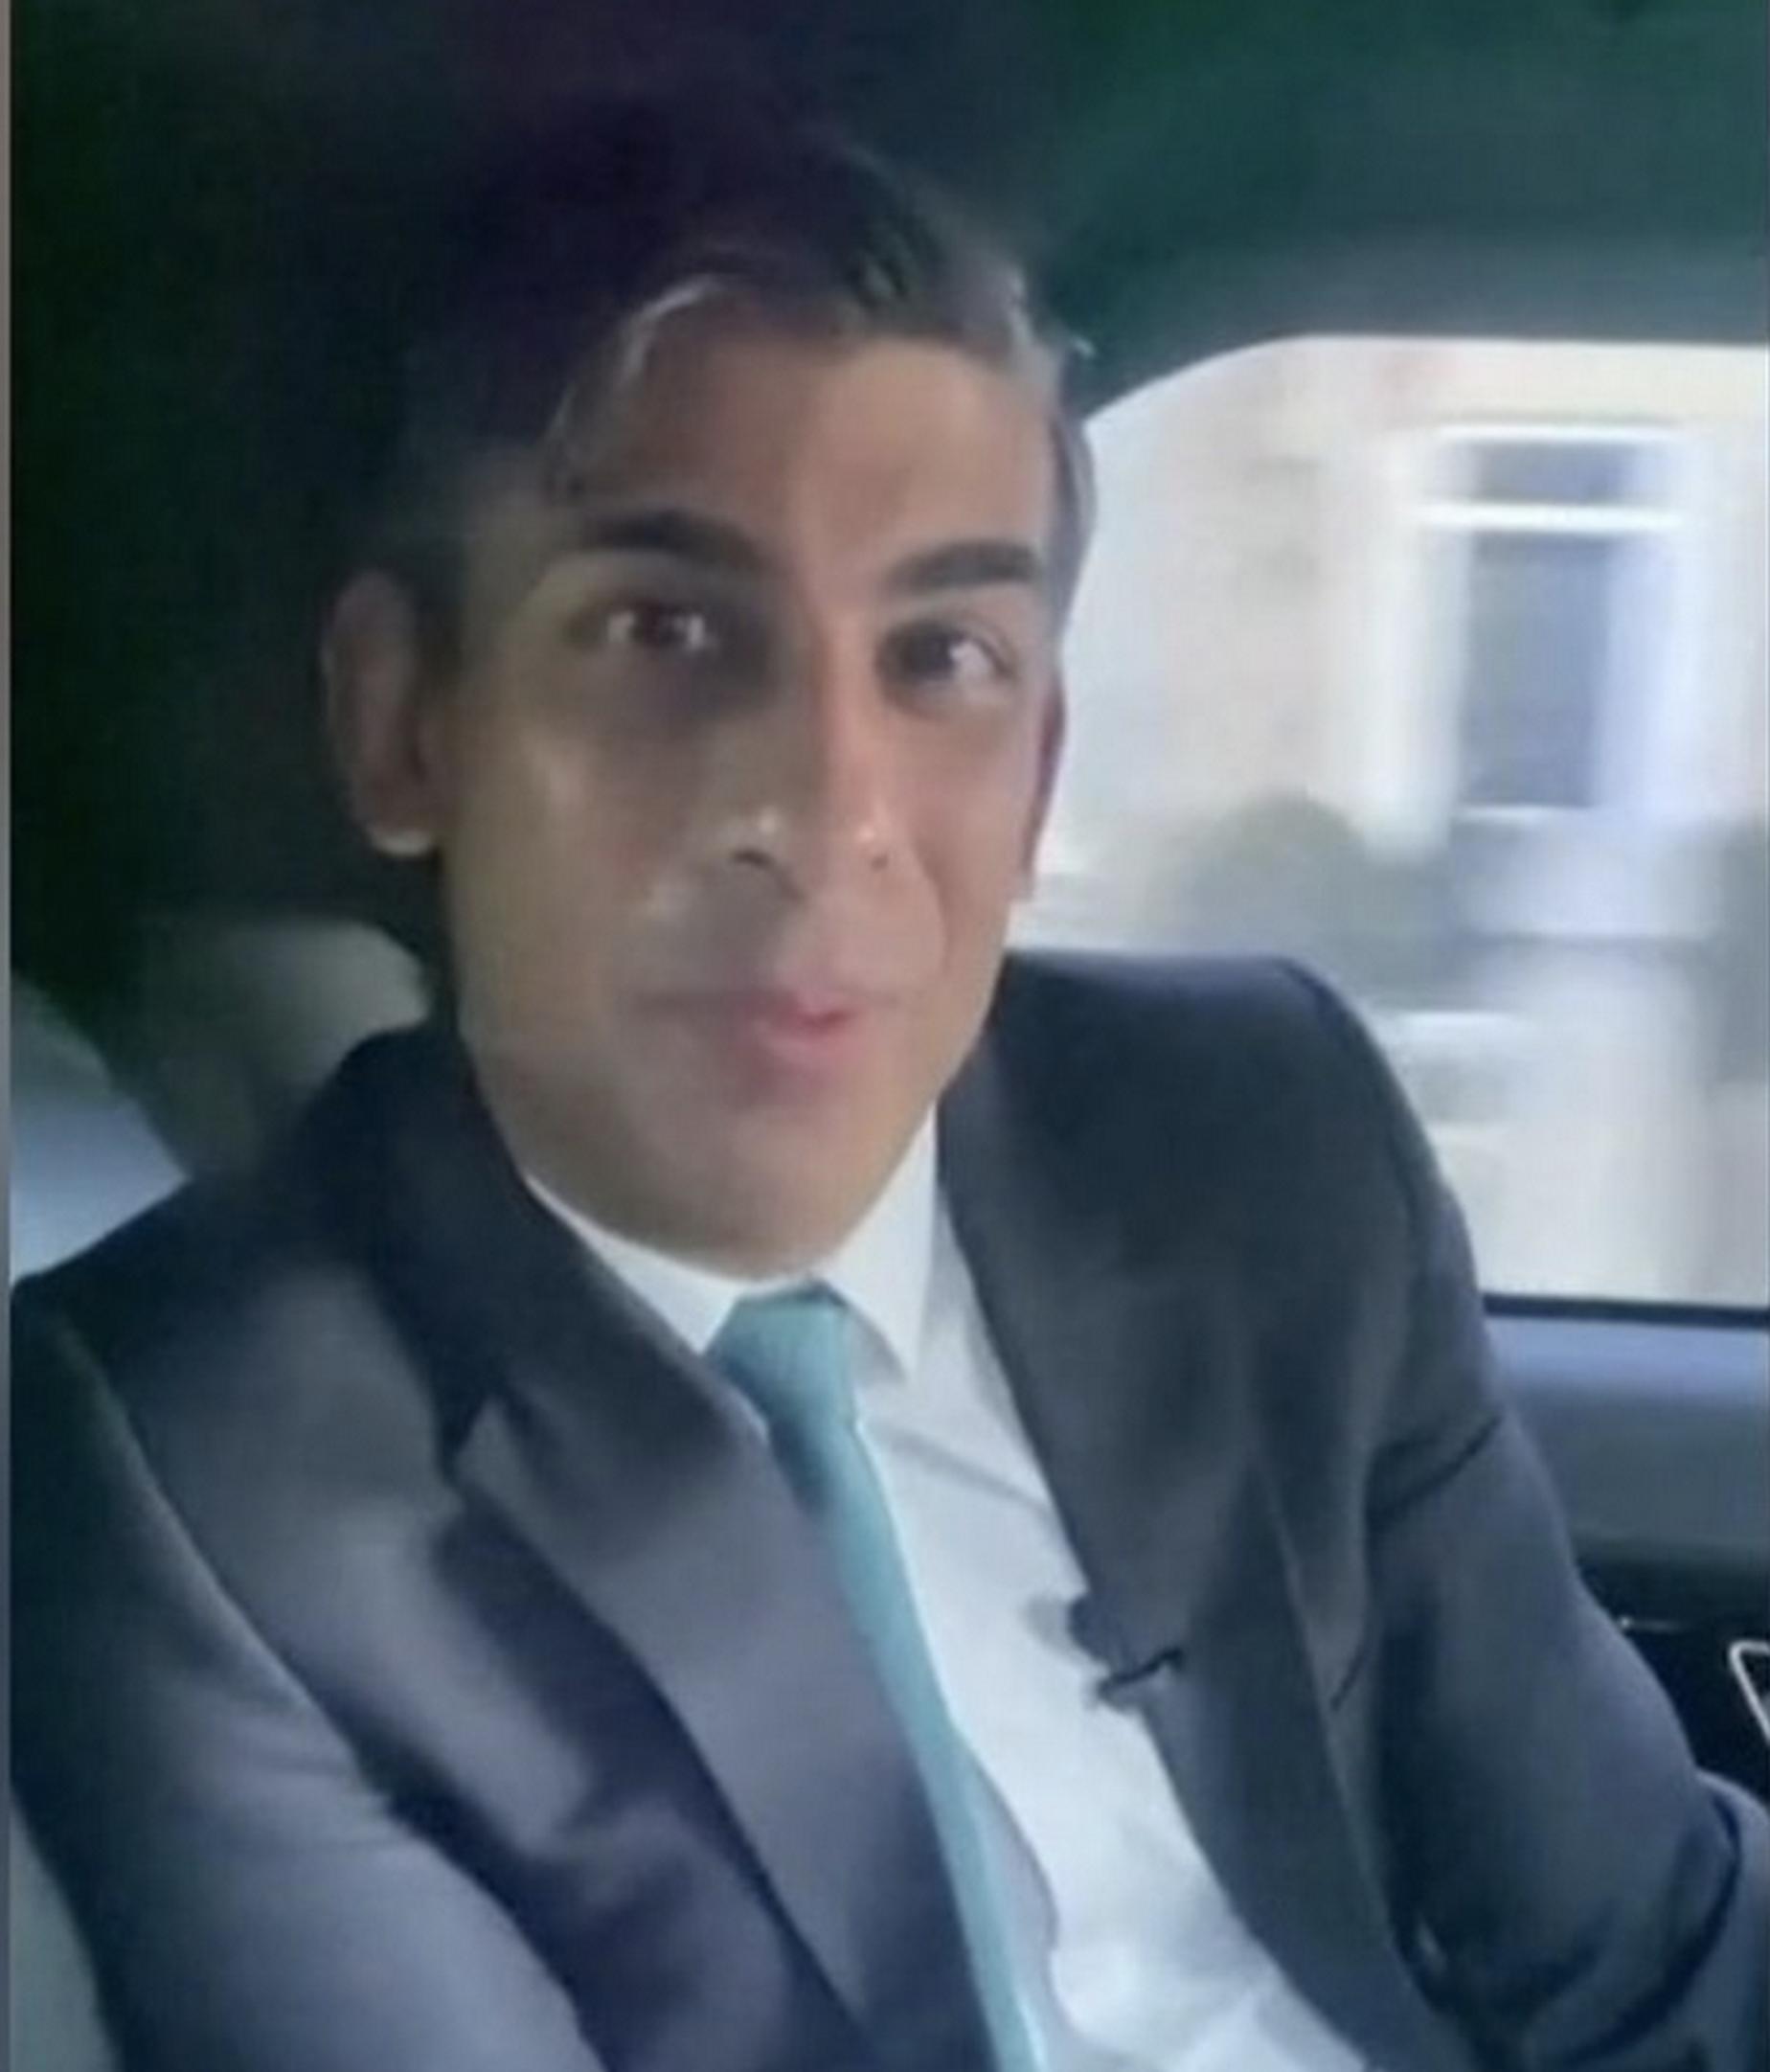 Rishi Sunak recorded an Instagram video in the back of car while not wearing a seatbelt